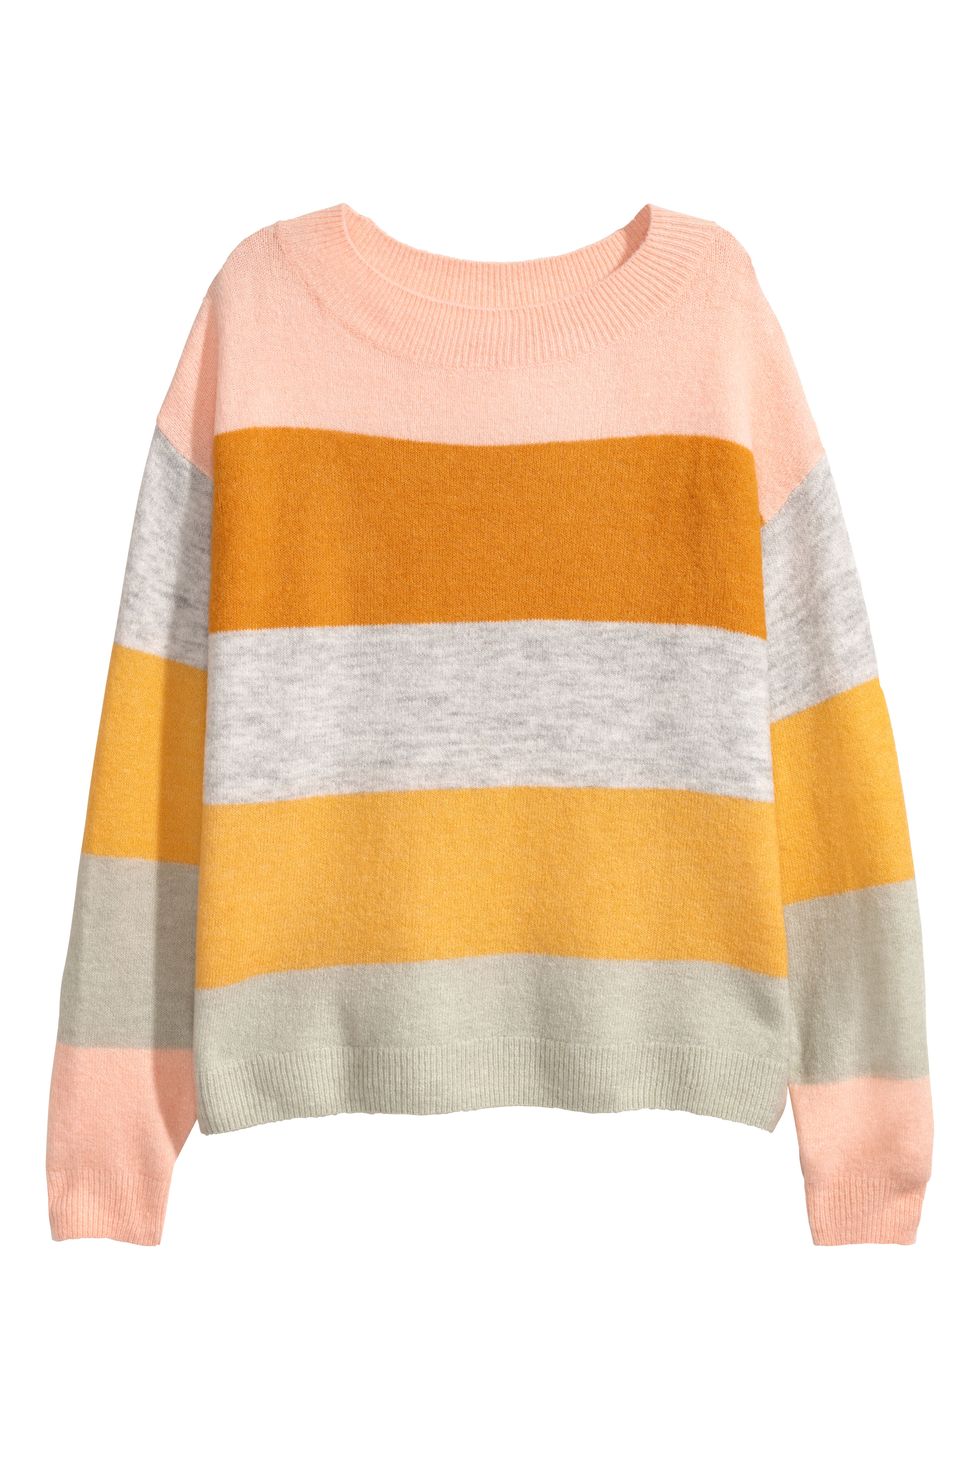 Clothing, Yellow, Orange, Sleeve, Sweater, Outerwear, Neck, Blouse, Top, Peach, 